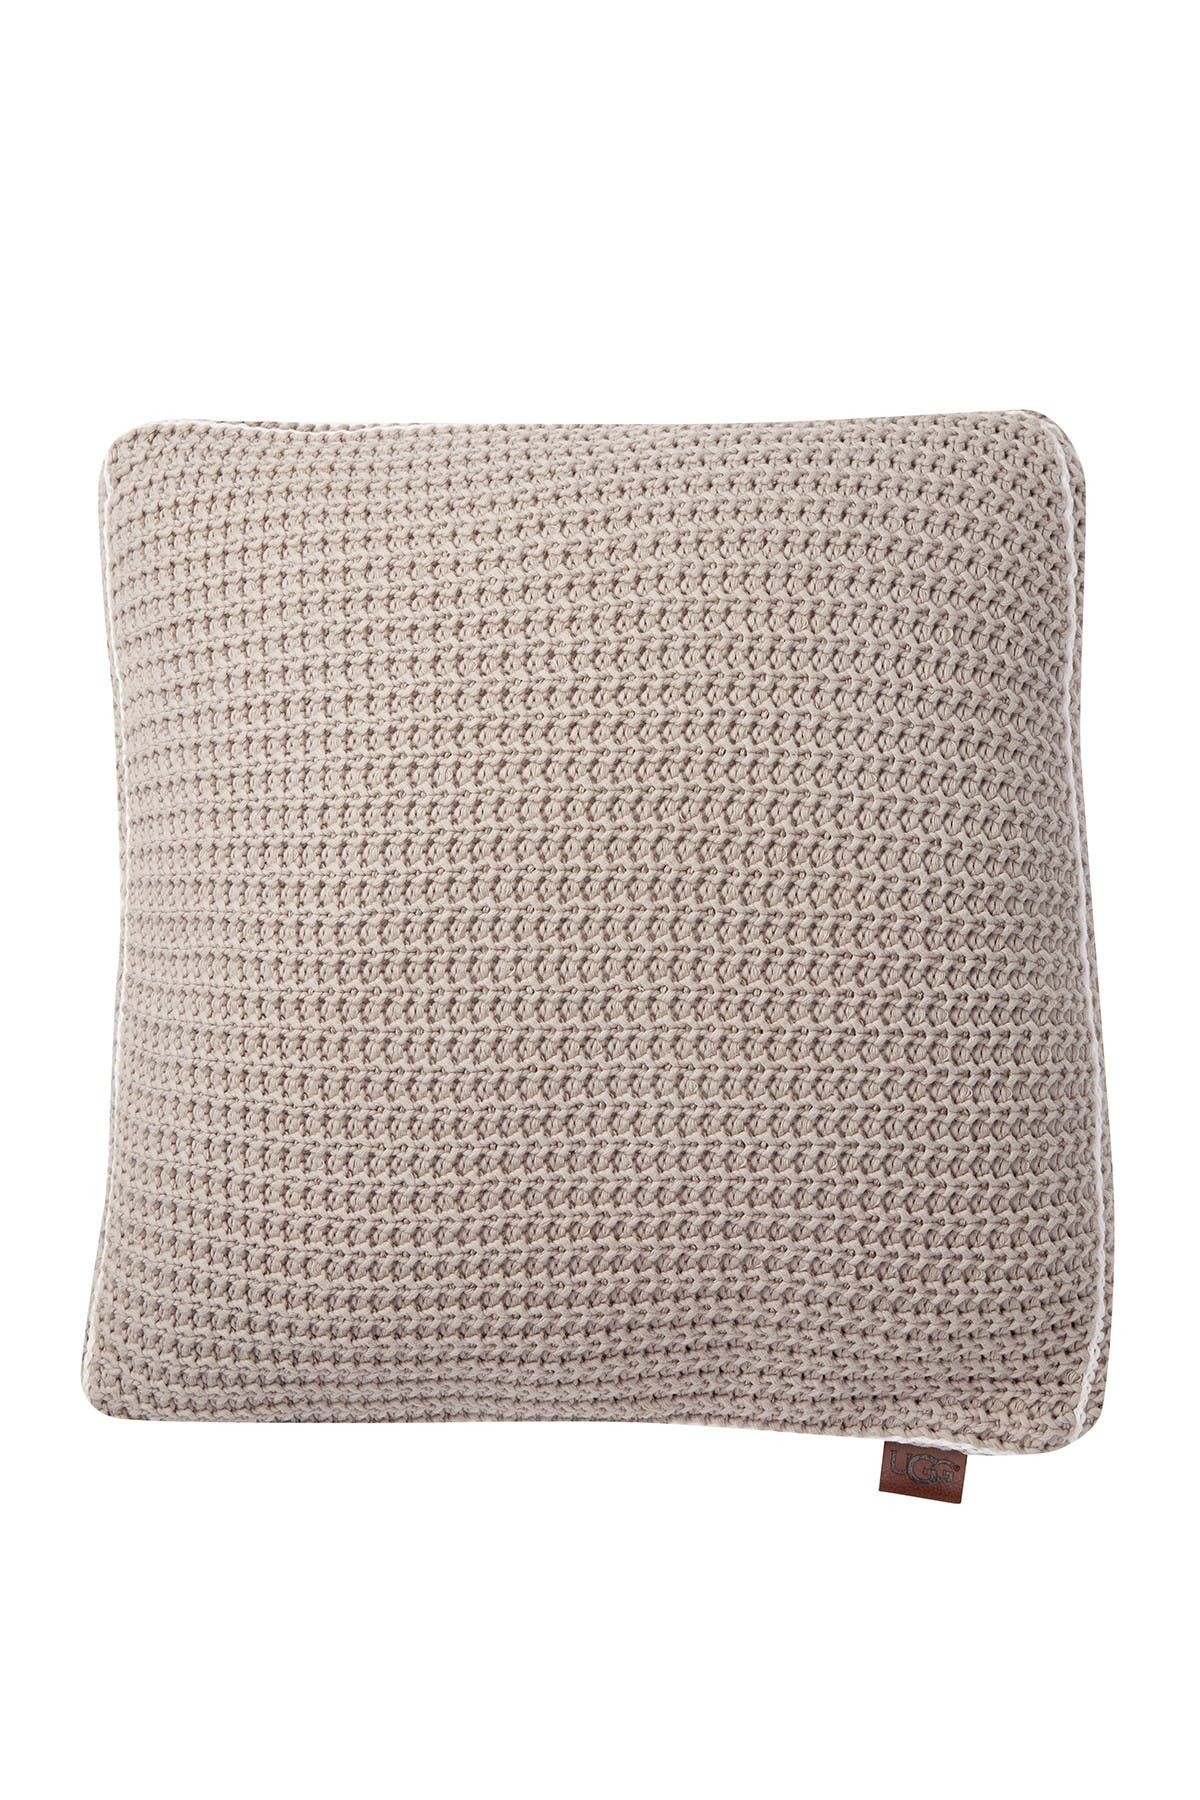 UGG COLLECTION | Luna Pillow - Stone 